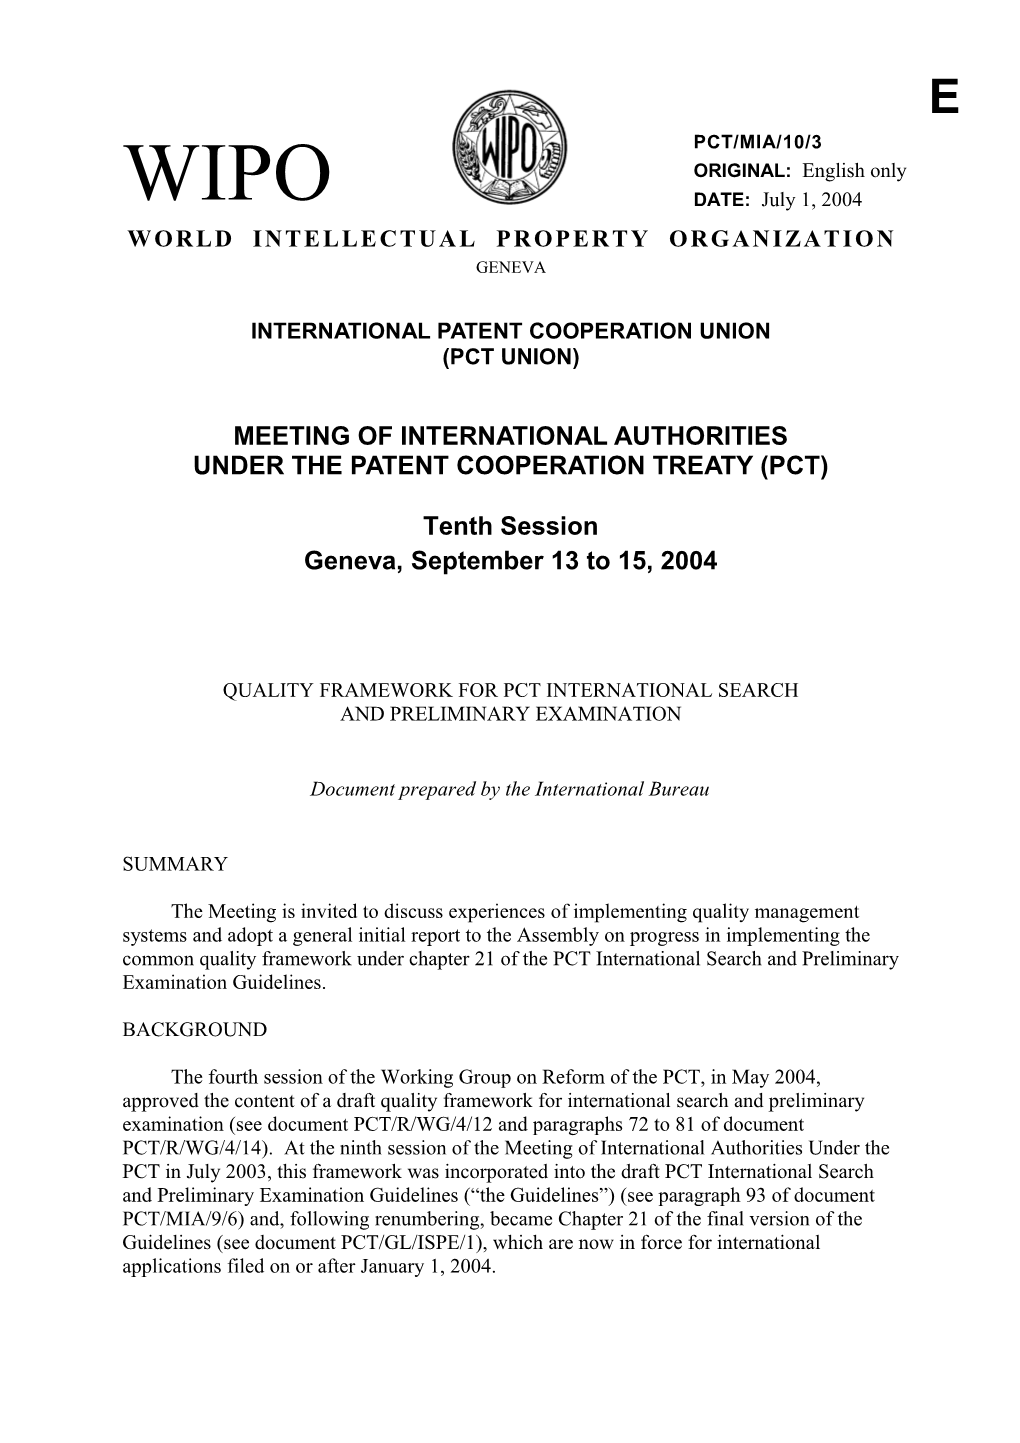 PCT/MIA/10/3: Quality Framework for PCT International Search and Preliminary Examination